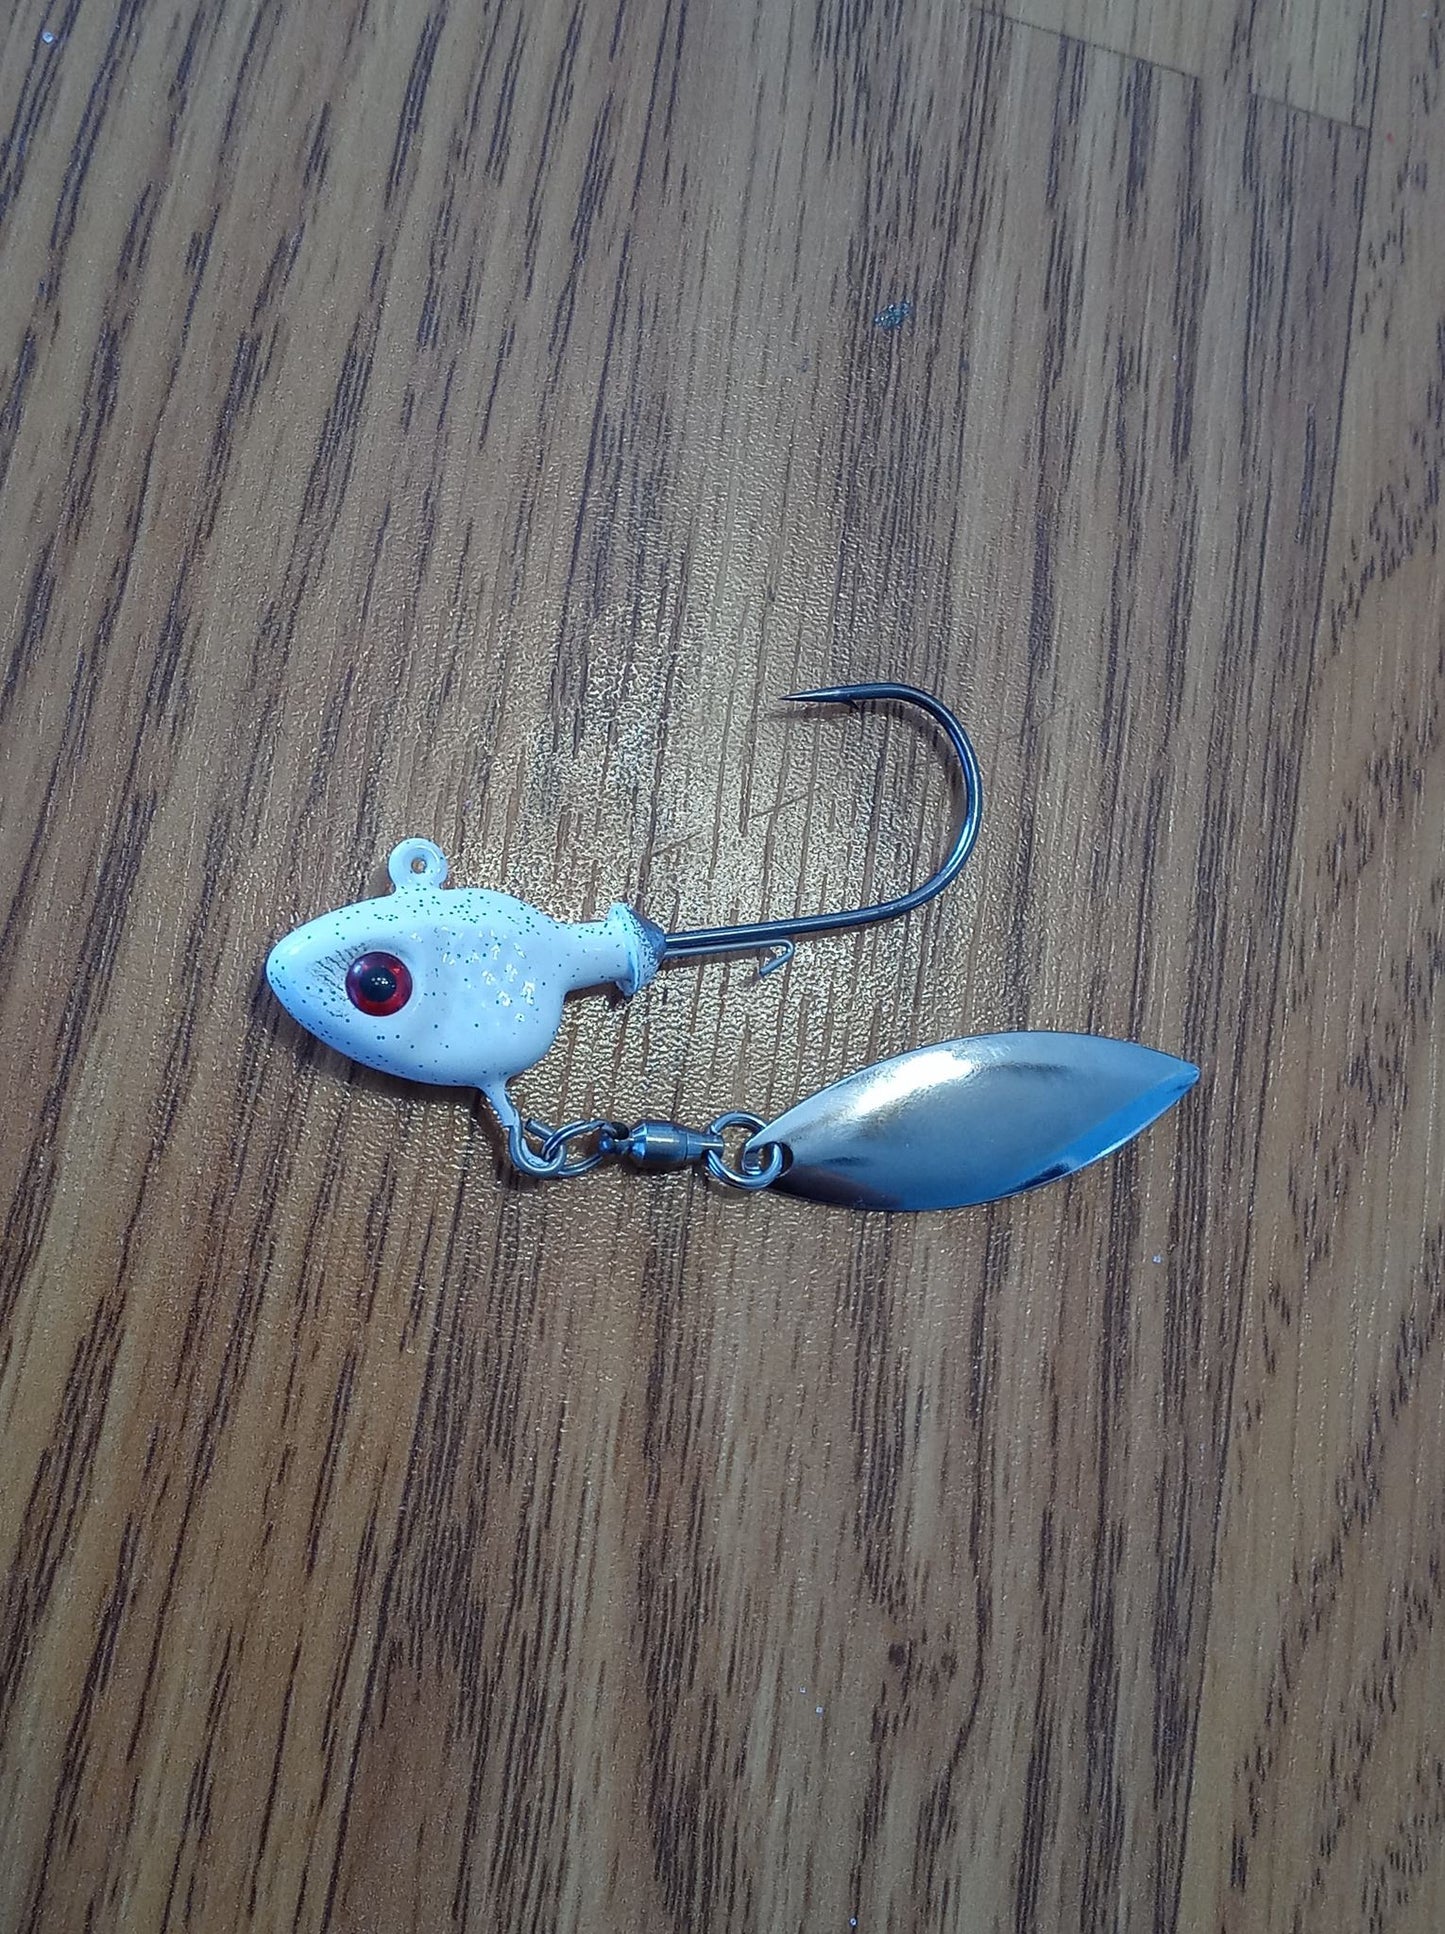 10 The DHT Underspin Lure